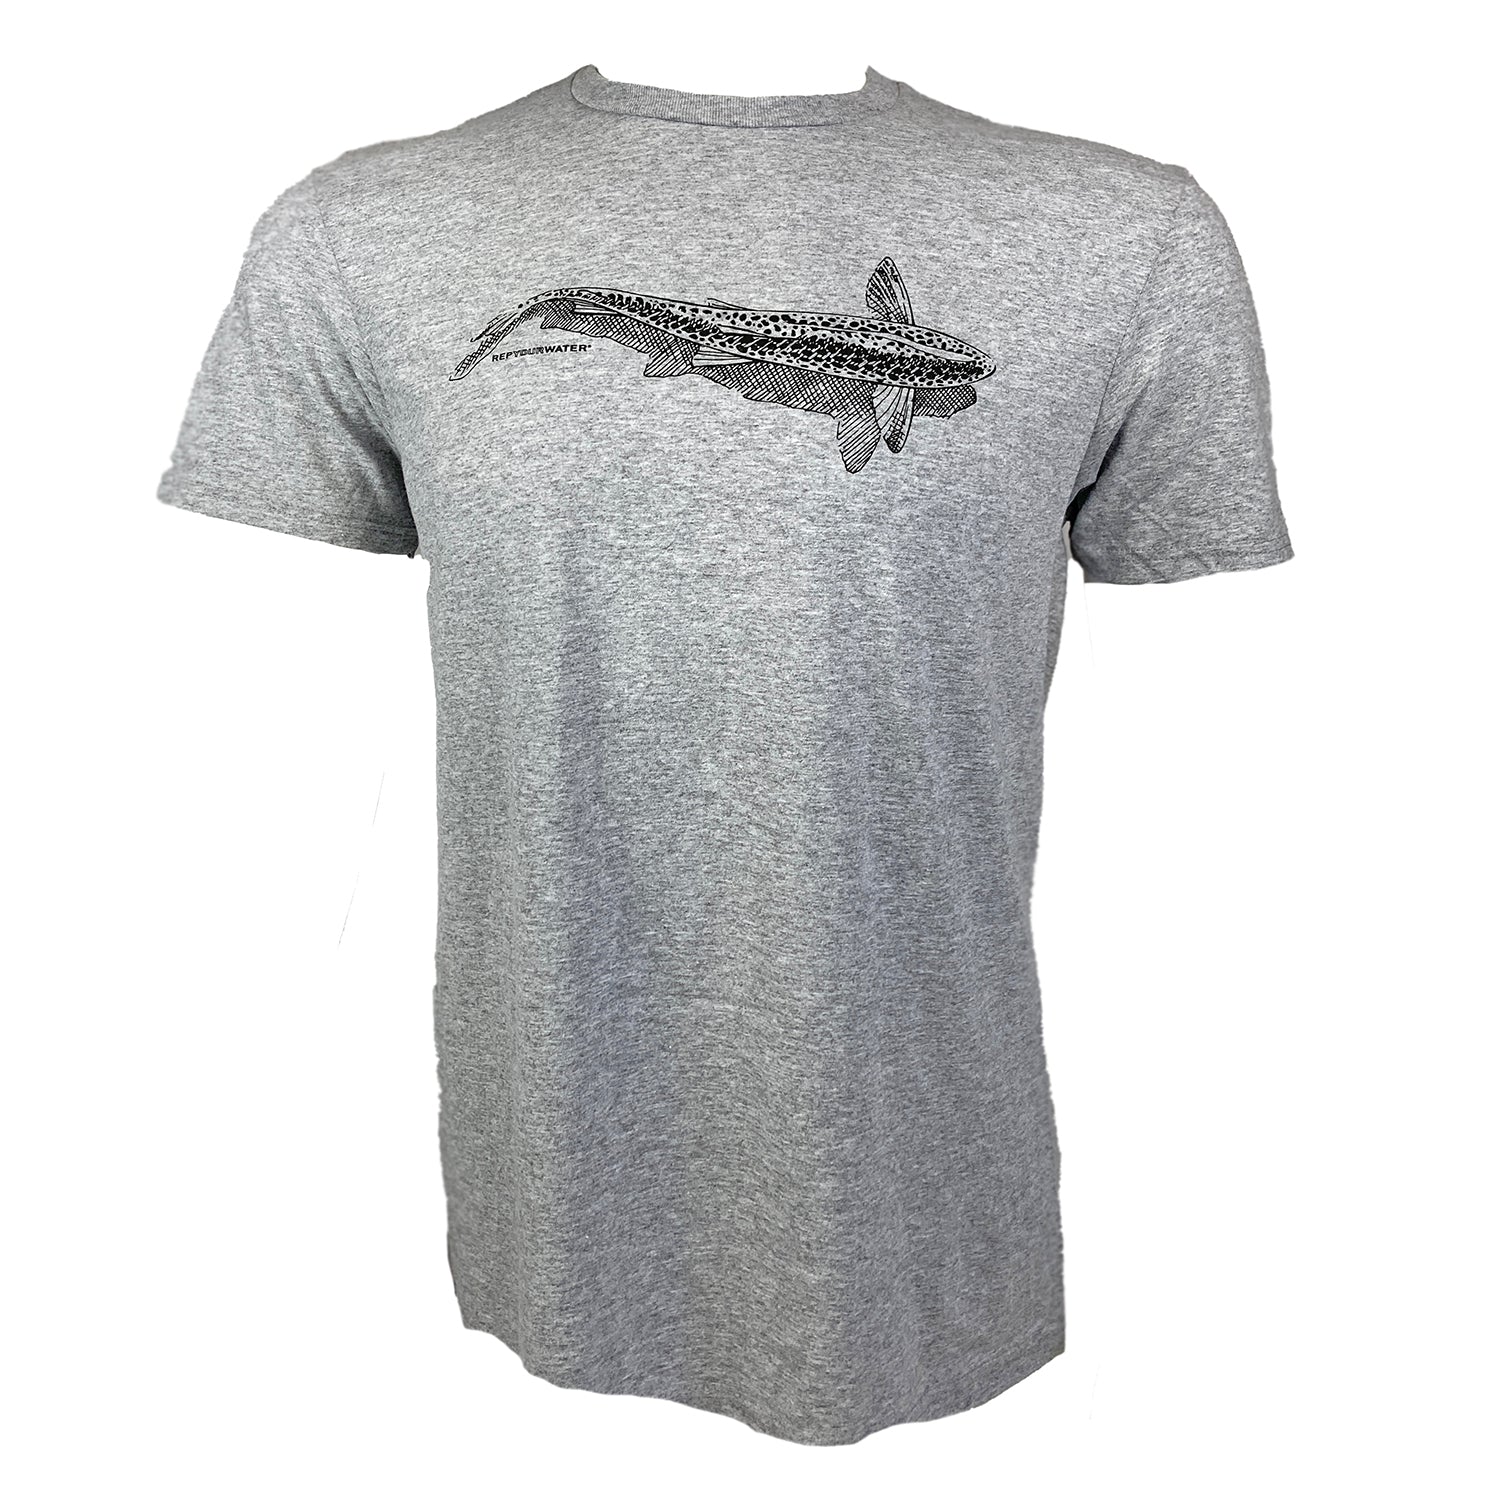 Gray tee with artistically rendered overhead view of swimming trout across the chest.